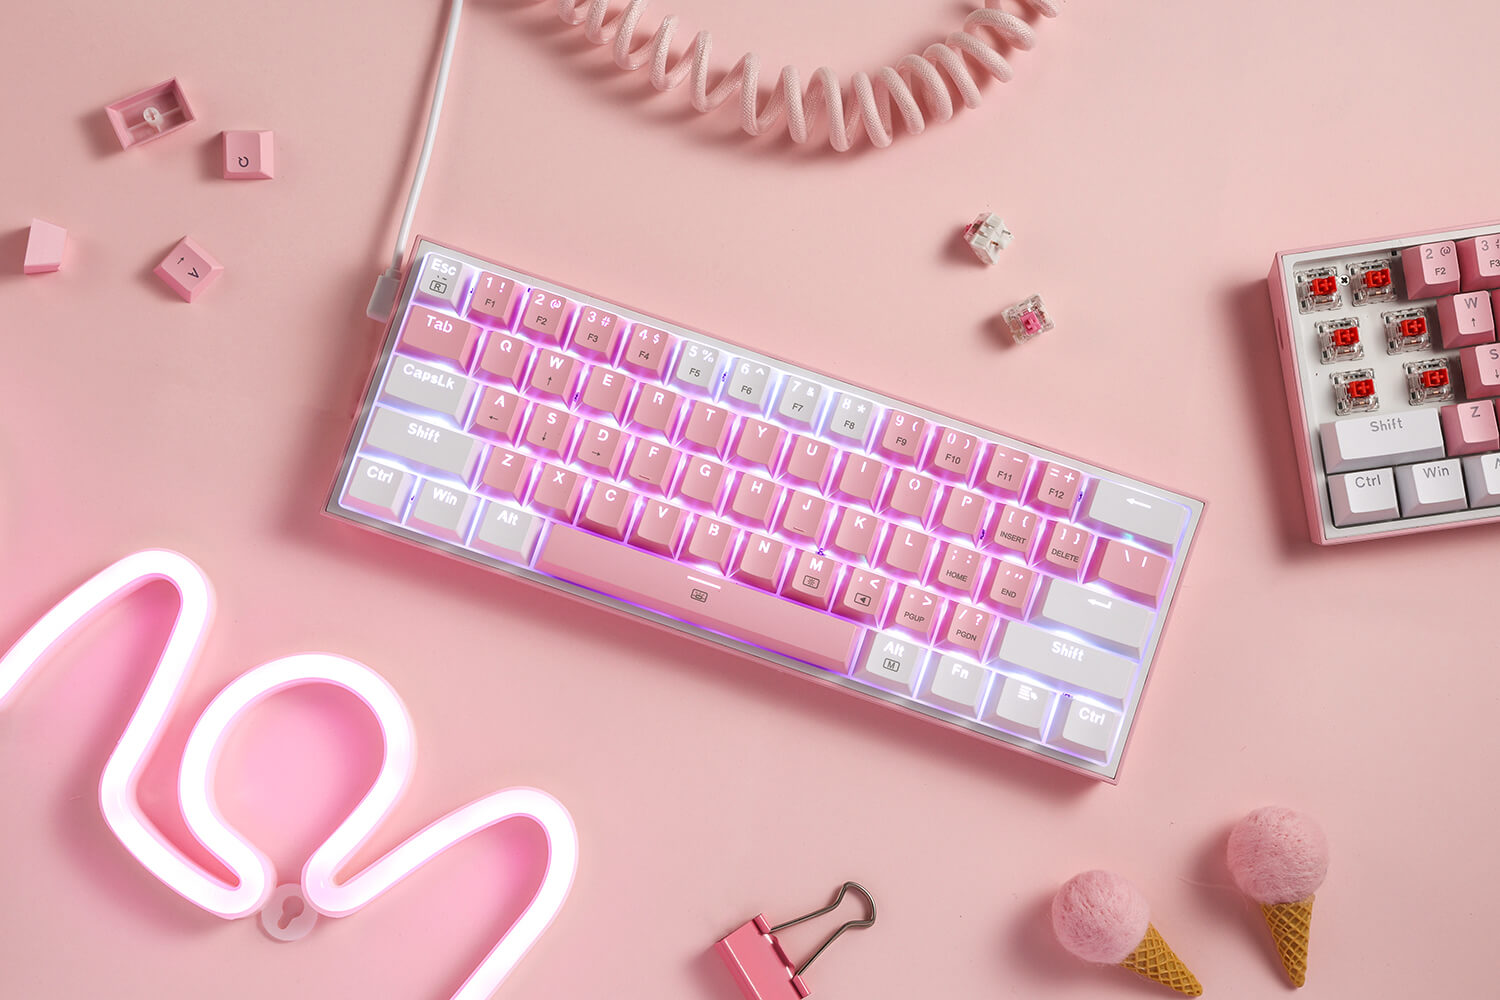 61 Keys Compact Mechanical Keyboard wWhite and Pink Color Keycaps.JPG